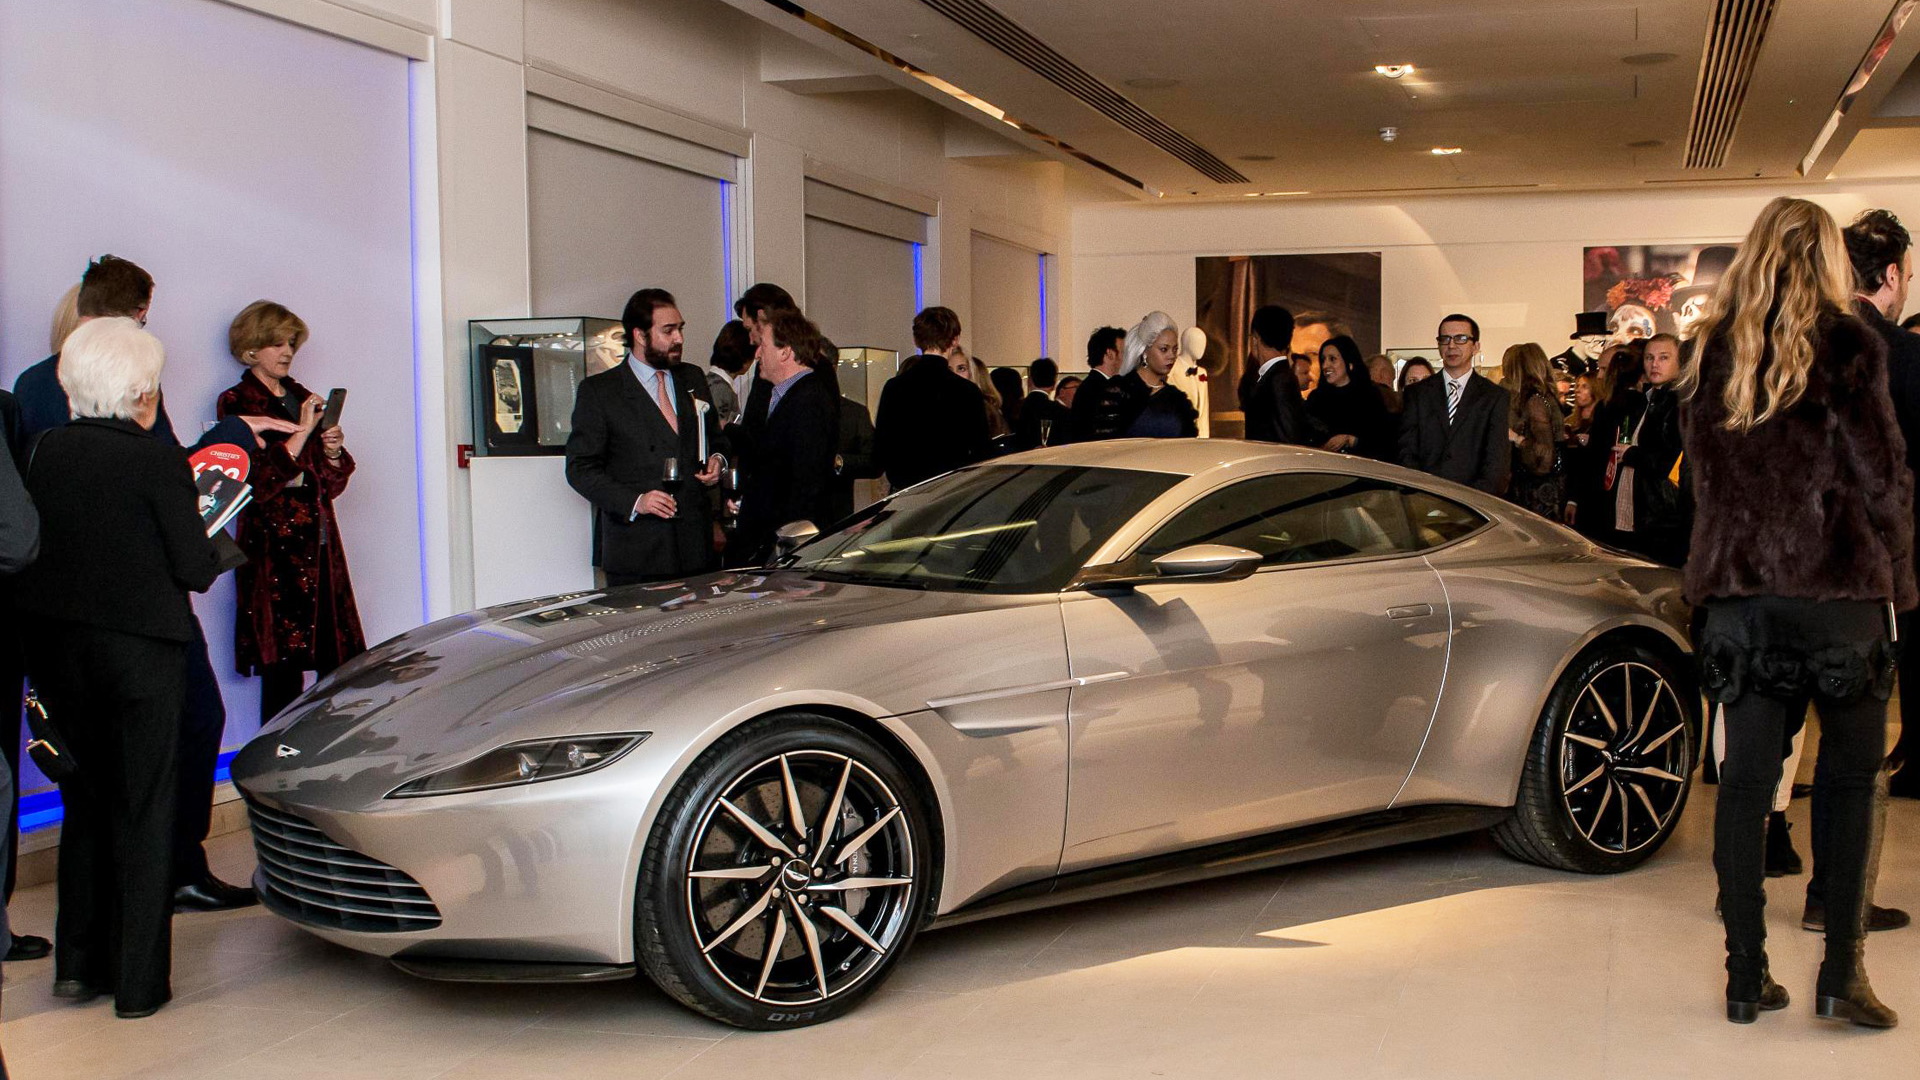 Aston Martin DB10 auction at Christie’s in London, February 18, 2016